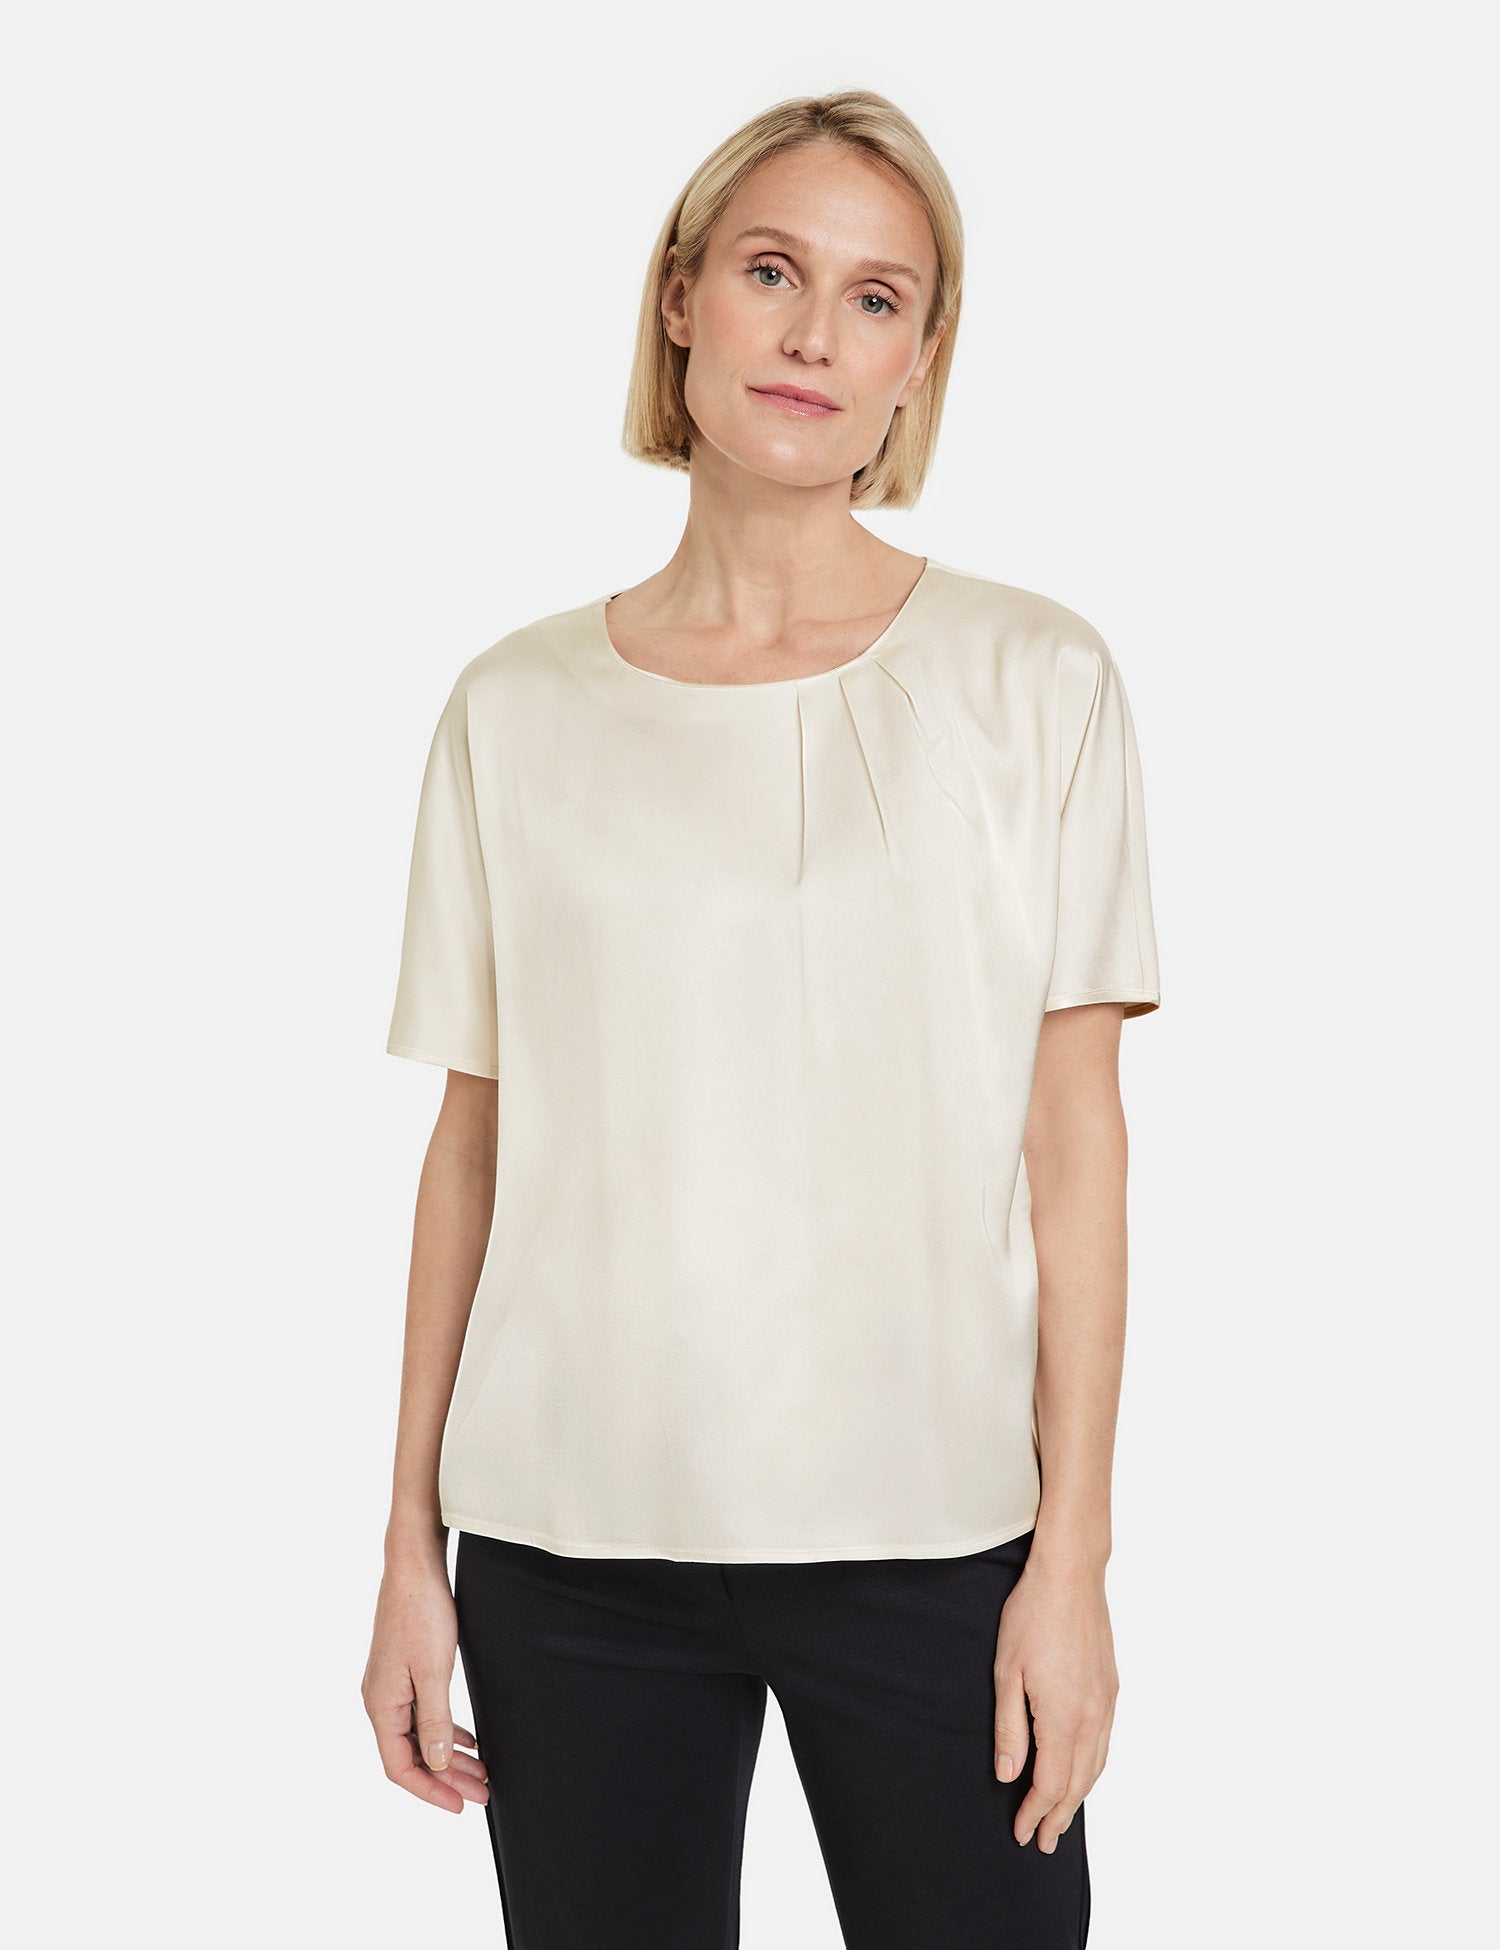 Flowing Blouse Top With Fabric Panelling_977047-35033_90118_04